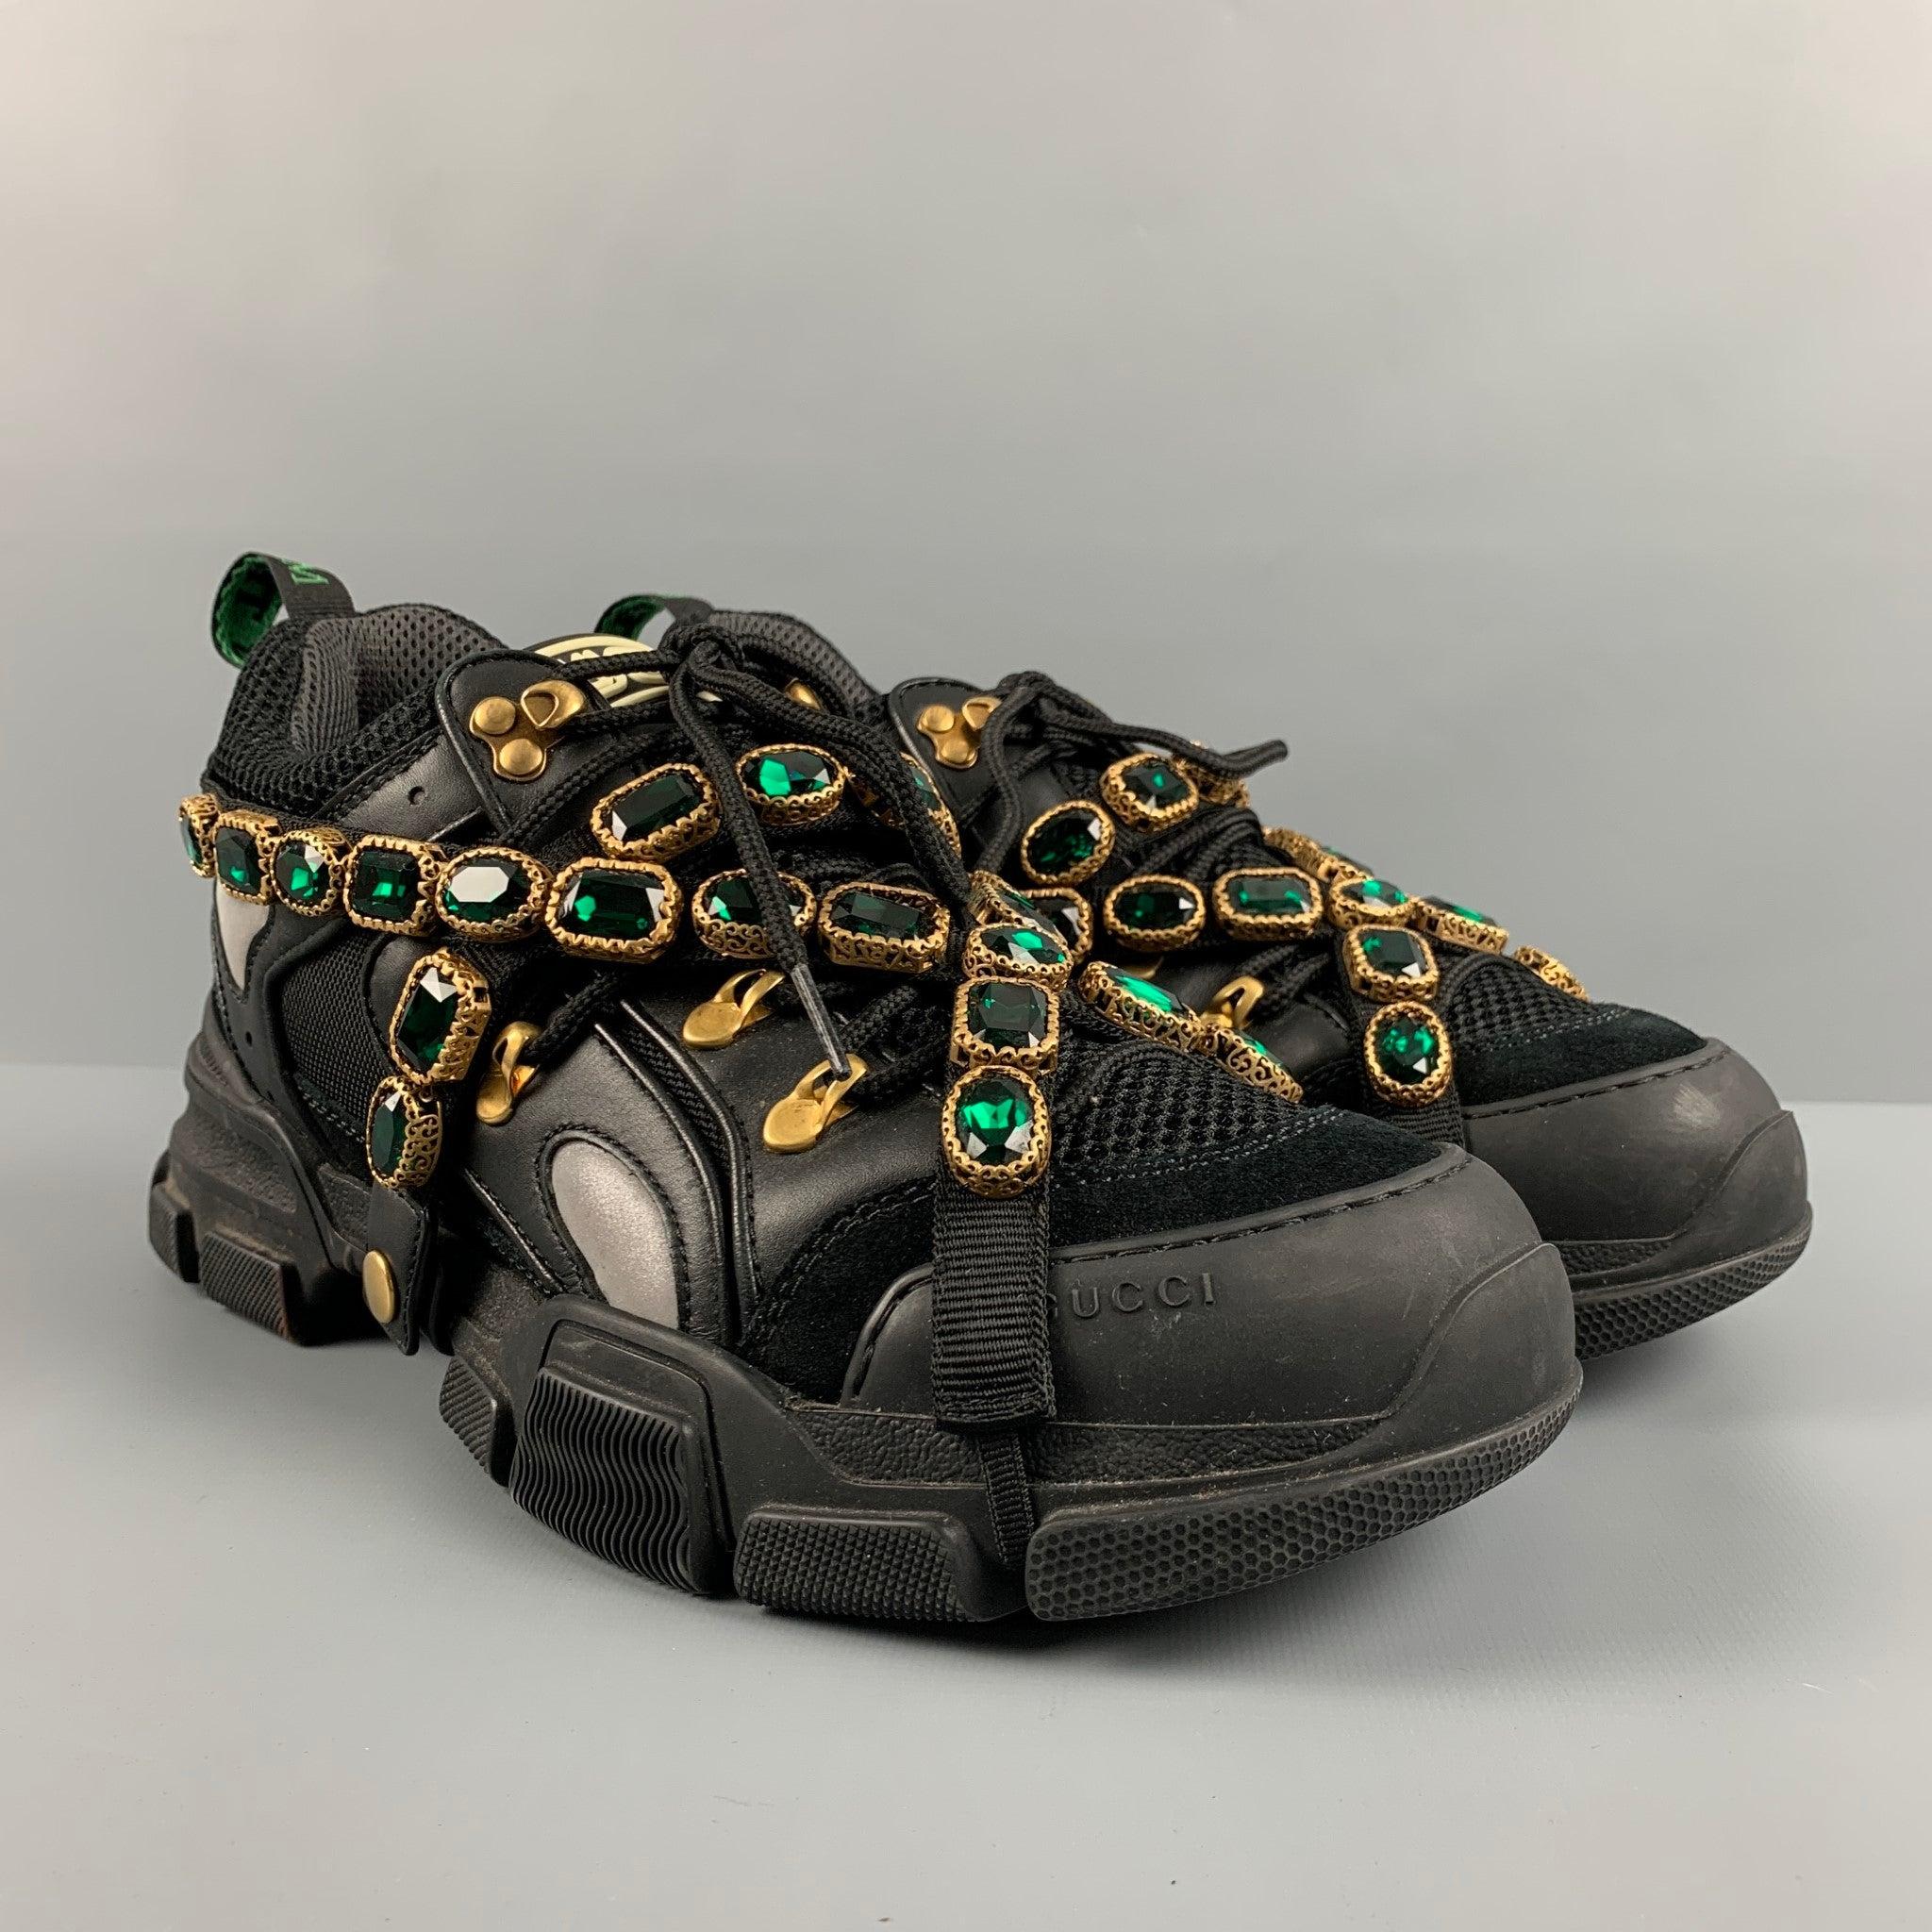 GUCCI 'Flashtrek' sneakers comes in a black nylon, leather trim, mesh panels, green heel tab, detachable green rhinestones belt straps, chunky midsole, and a lace up closure. Made in Italy.Very Good Pre-Owned Condition.
Moderate Signs of wear.